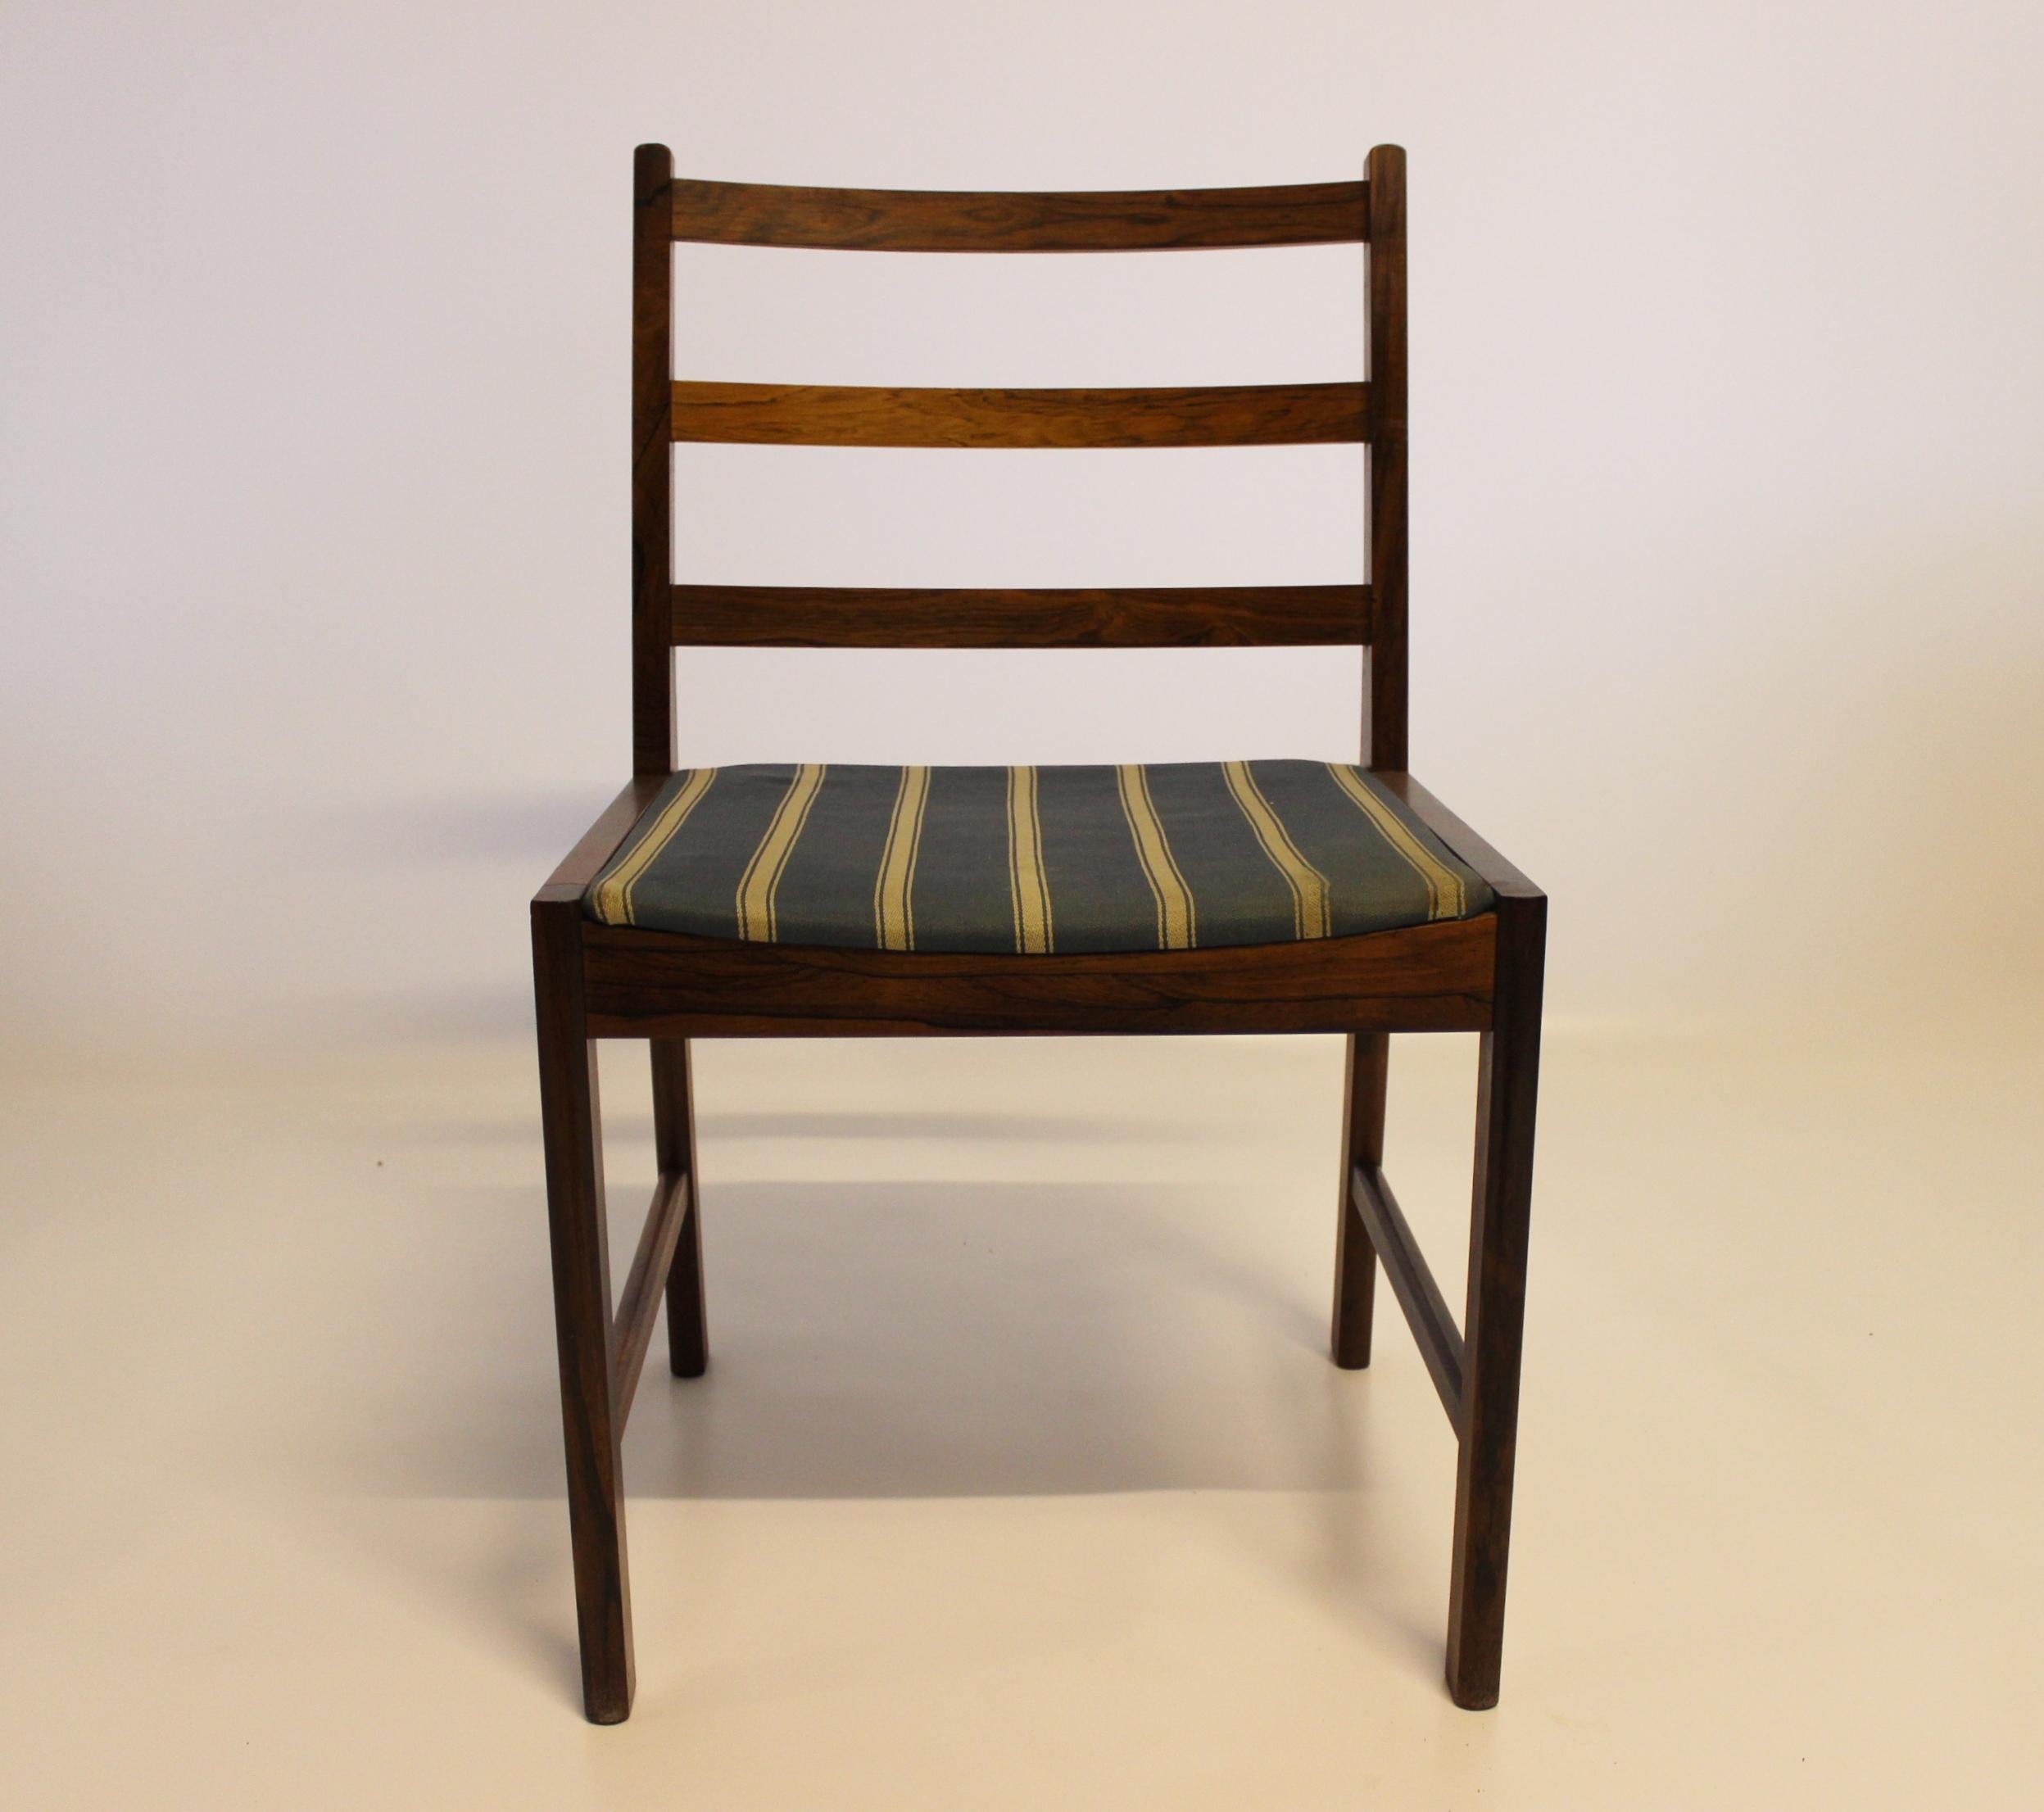 A set of four dining chairs in rosewood and seats upholstered with blue striped fabric, of Danish design from the 1960s. The chairs are in great vintage condition.

This product will be inspected thoroughly at our professional workshop by our